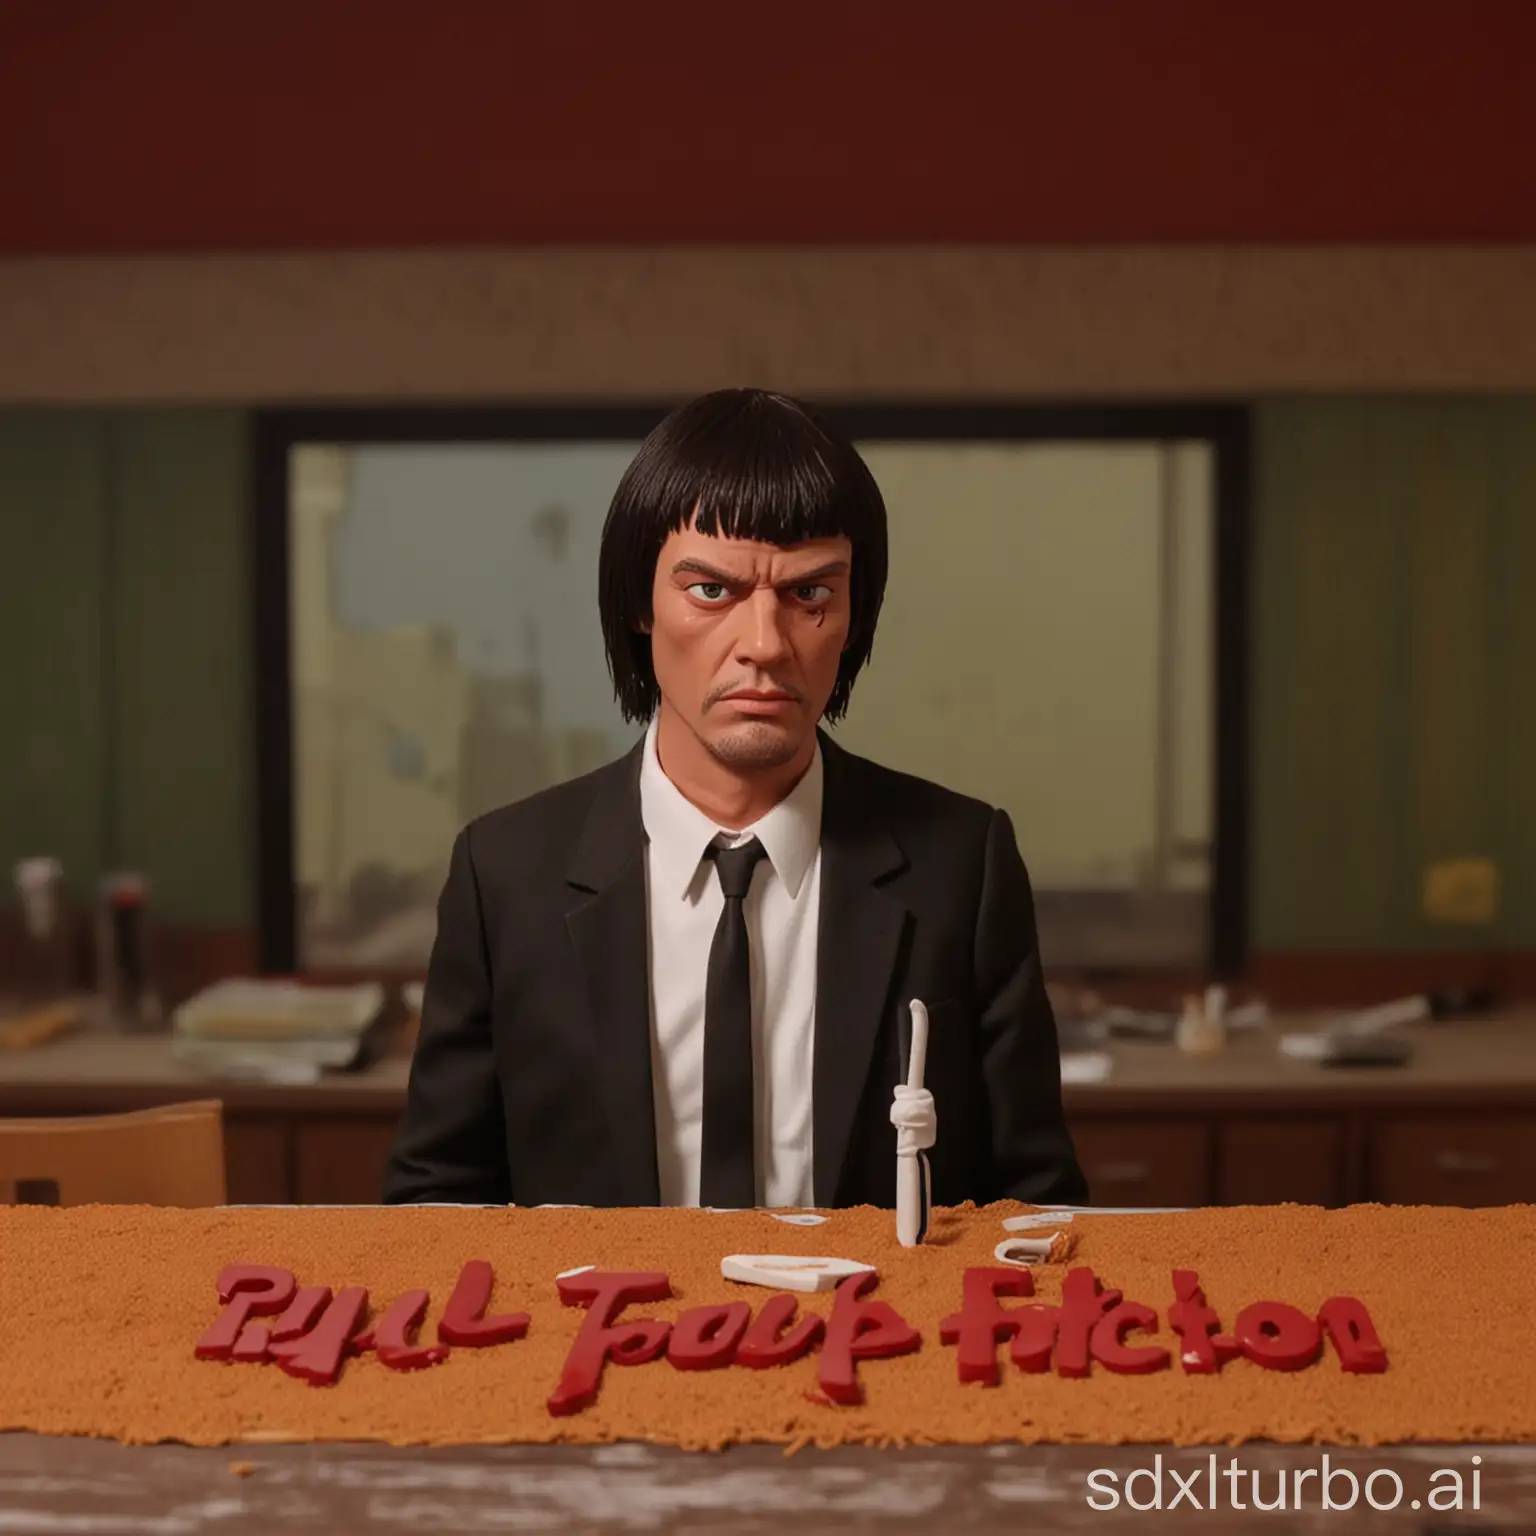 Pulp-Fiction-Characters-in-Stop-Motion-Animation